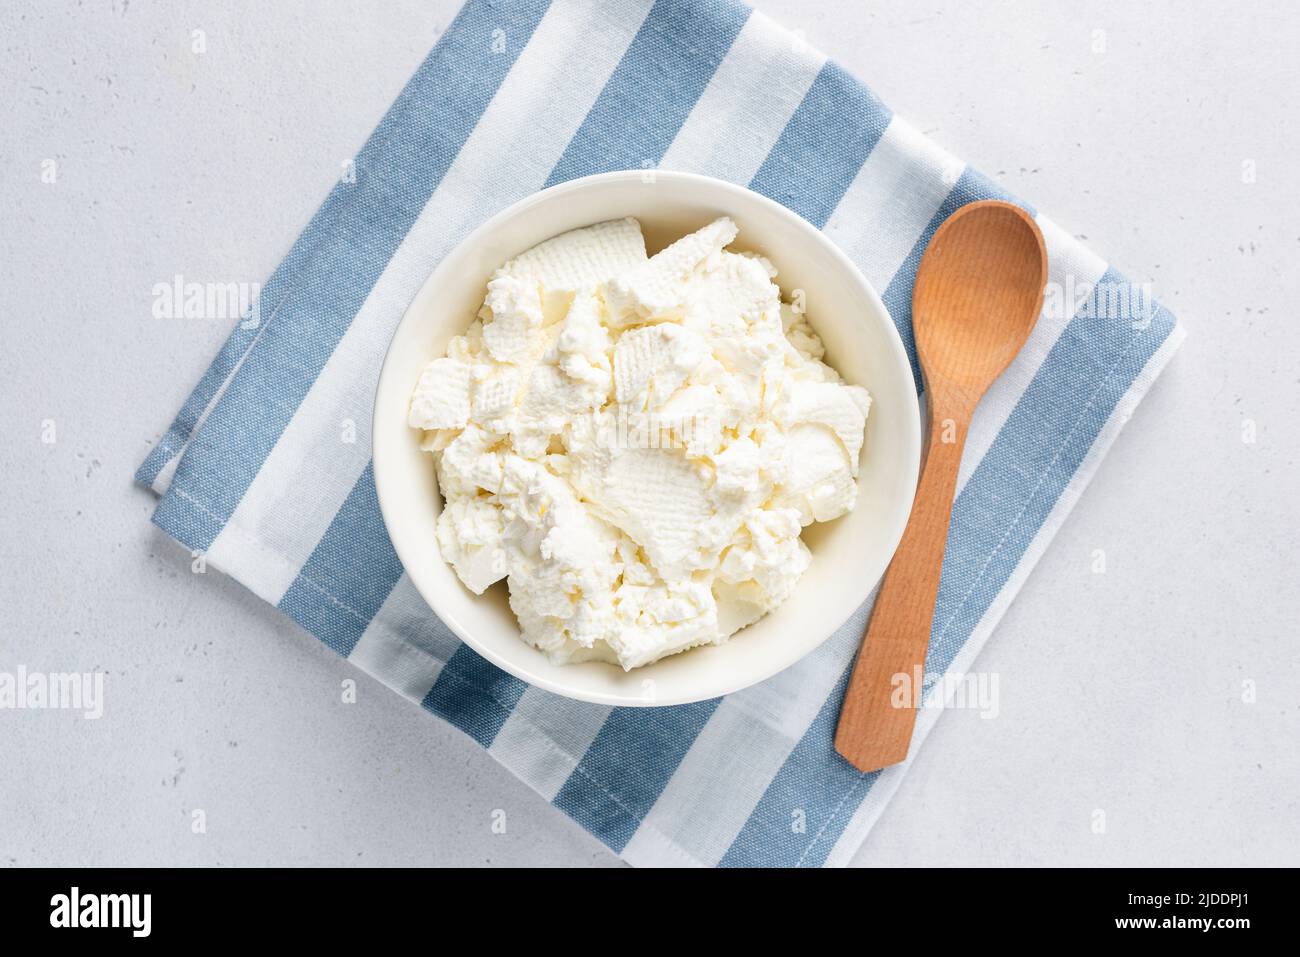 Homemade soft white Cottage cheese or Curd or Tvorog in a bowl, top view. Rich in protein and calcium dairy product Stock Photo